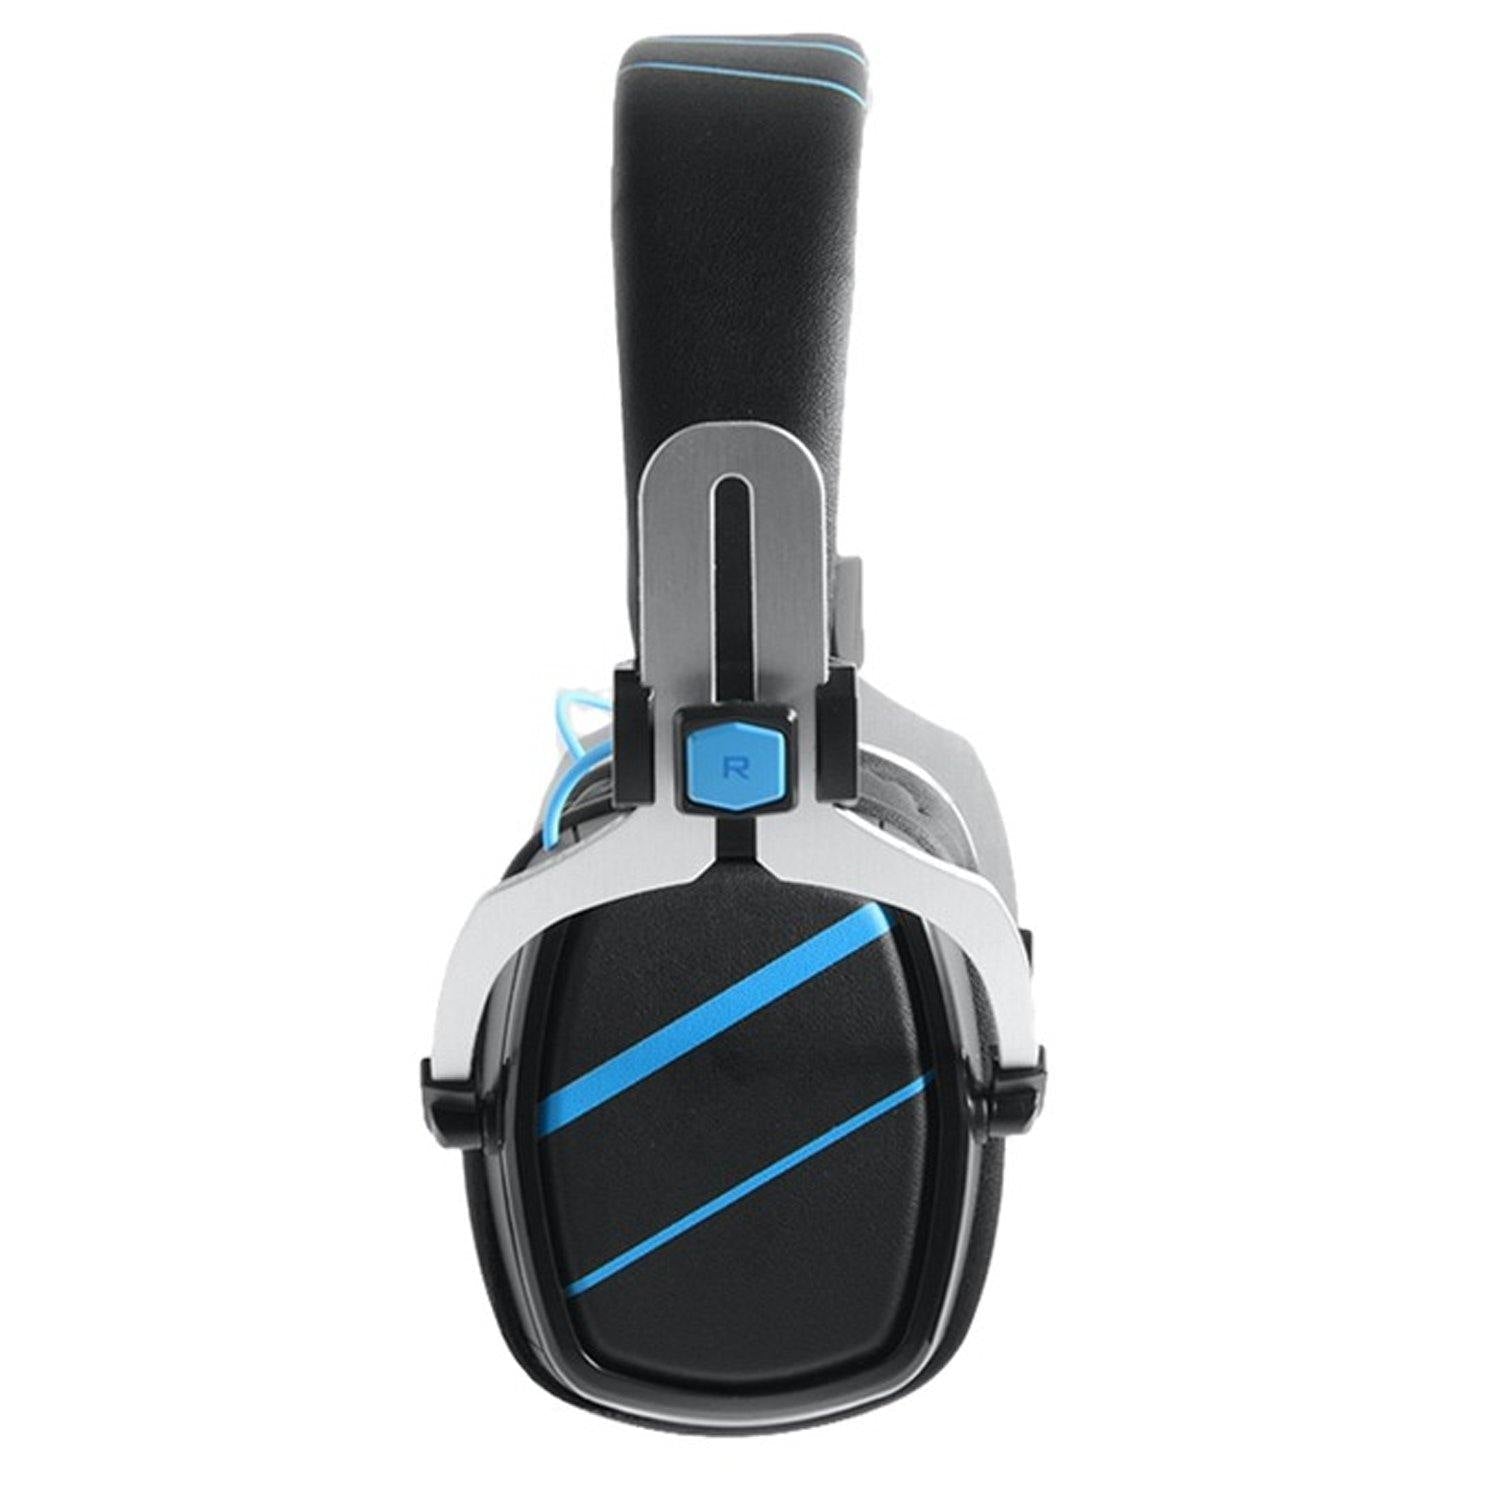 NewHank Soulmate Professional Closed Back Headphones - DY Pro Audio